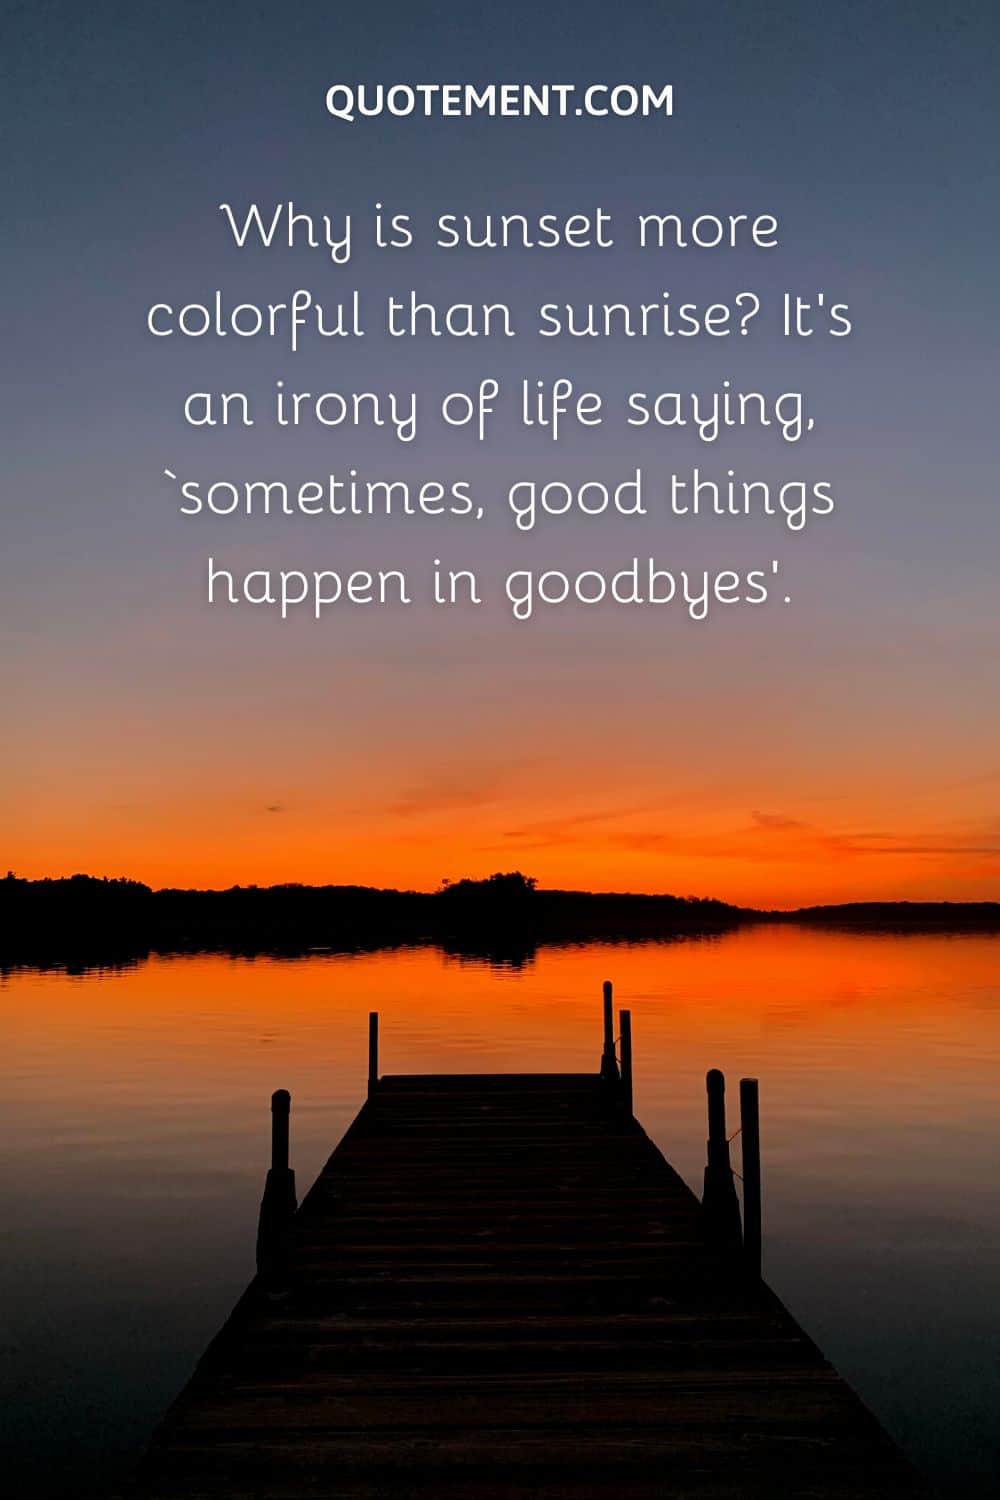 Why is sunset more colorful than sunrise It’s an irony of life saying, ‘sometimes, good things happen in goodbyes’.